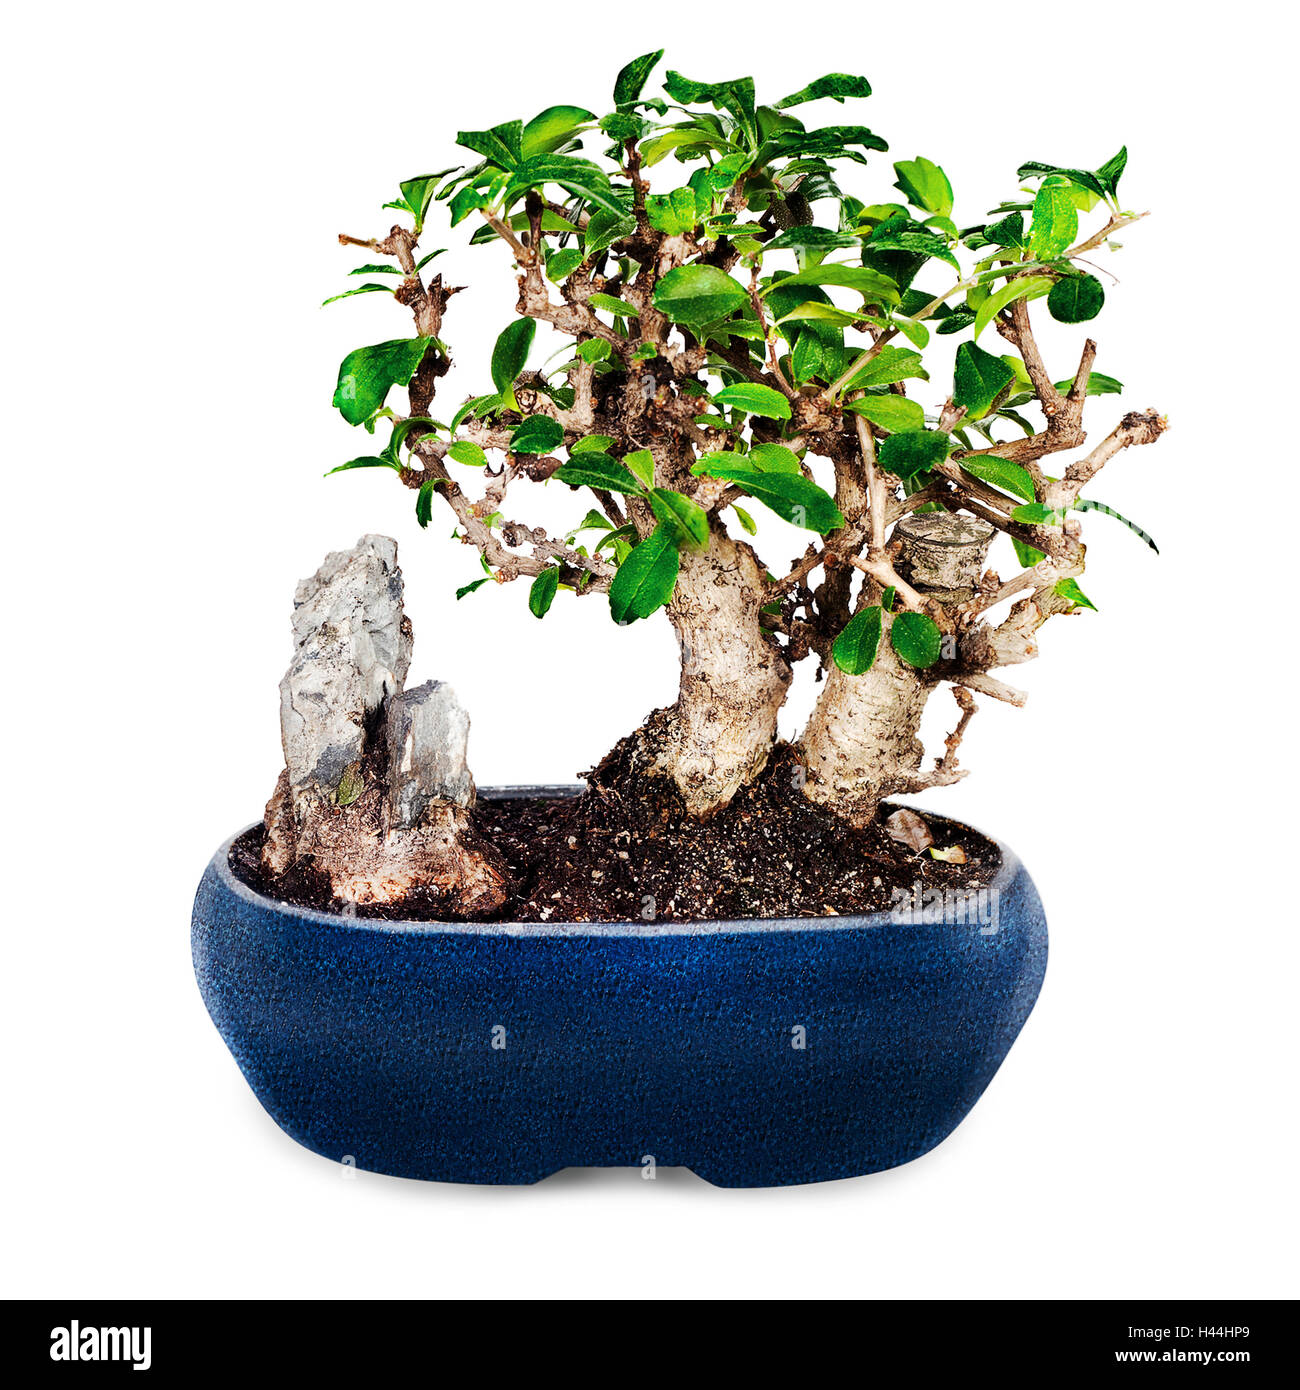 Miniature bonsai tree and stone in blue pot isolated on white background. Stock Photo